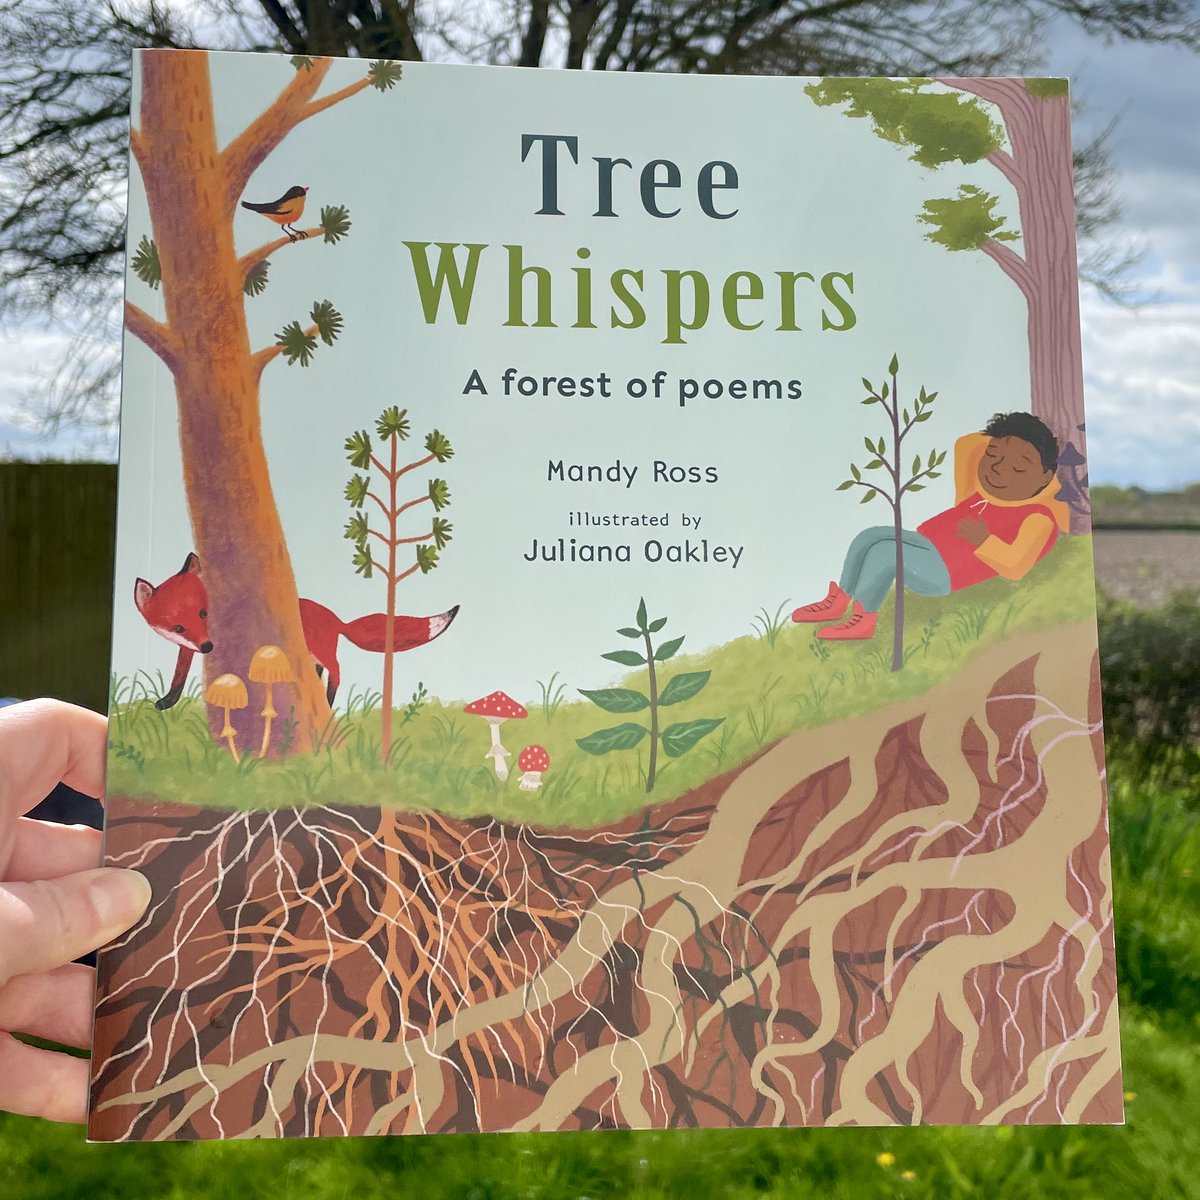 5 ⭐️ review!
'As I read this book, so many ways to use it in the classroom came to mind' @destinylawyer @NetGalley netgalley.com/book/287956/re…

TREE WHISPERS by @MandyRoss111 #JulianaOakley
#ReadingTips childs-play.com/products/97817… #poetry #trees #creativity #conservation #teachers